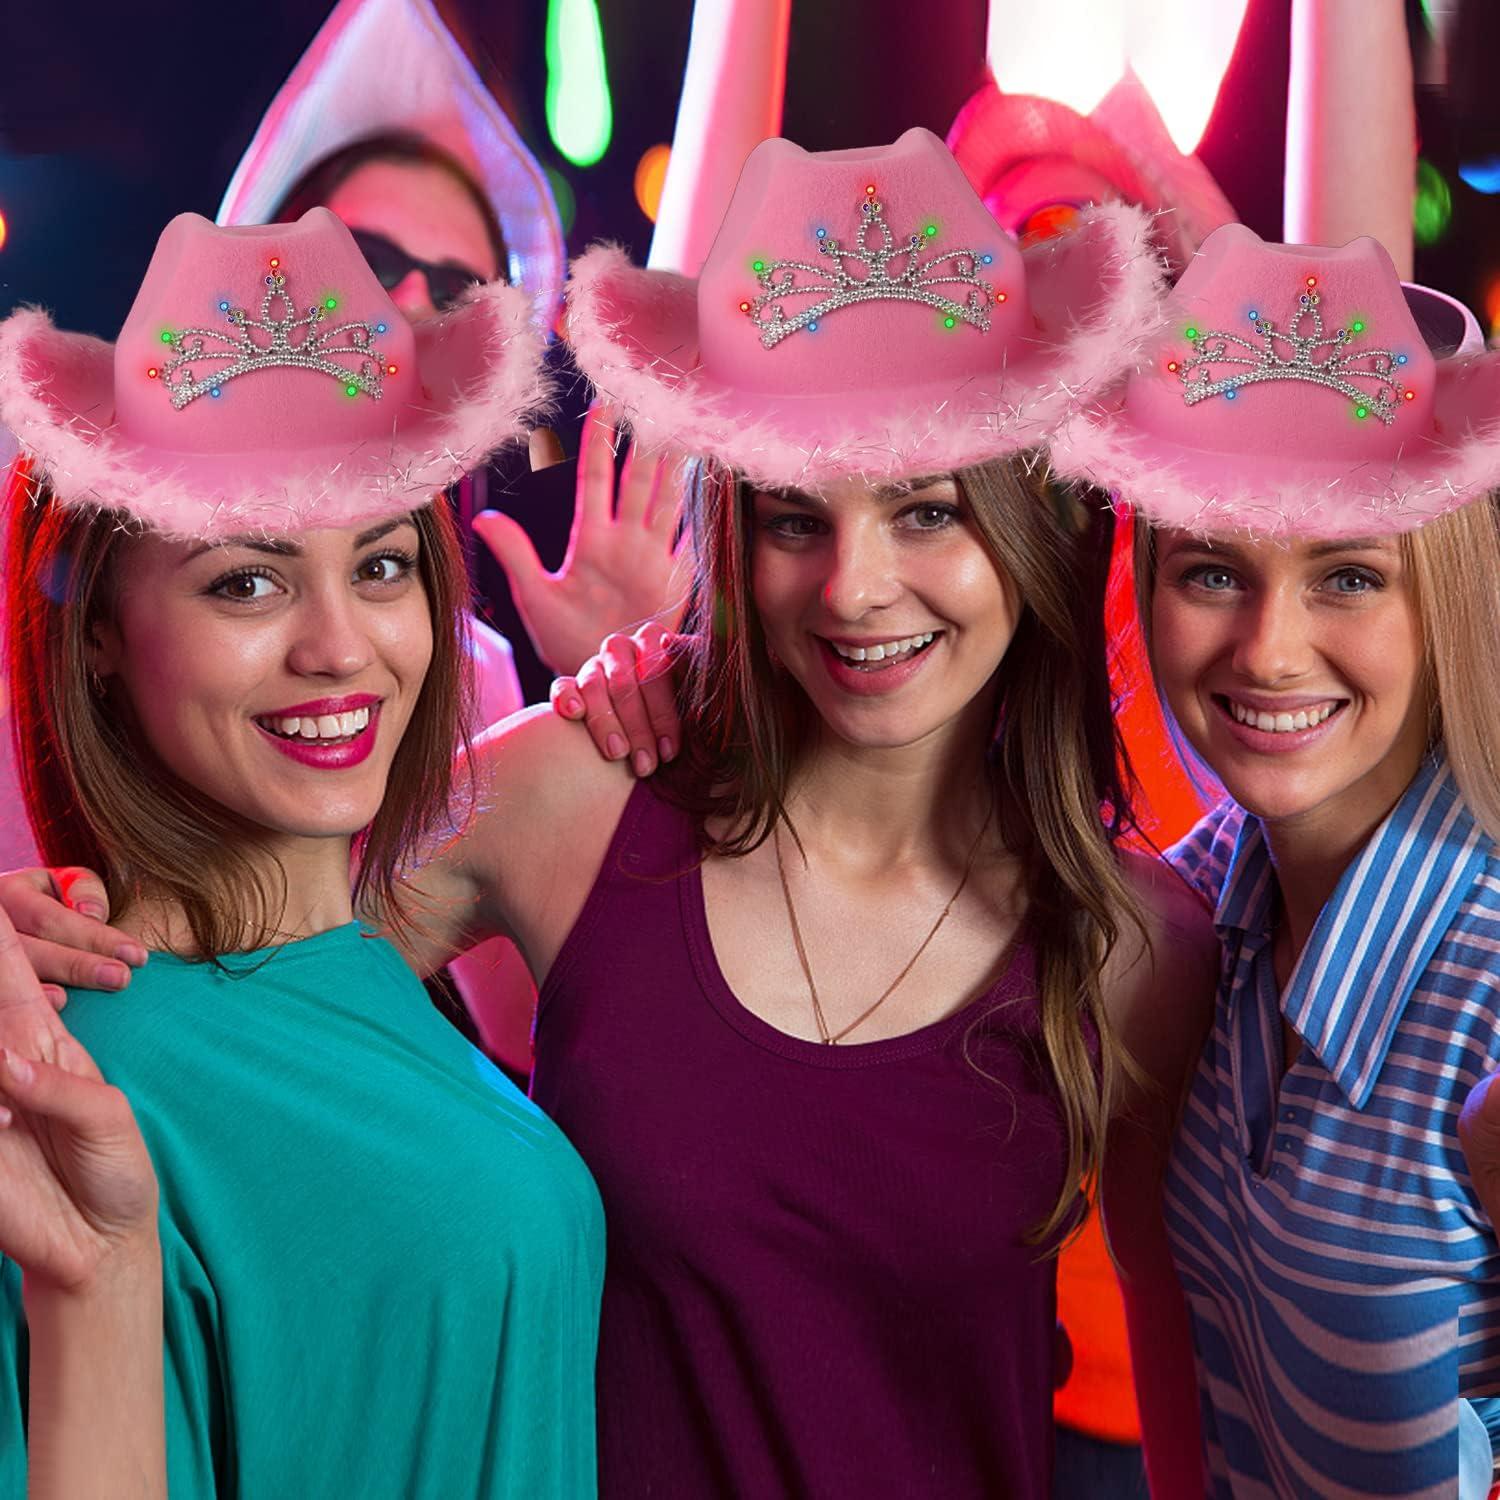 Pink Cowboy Hats, Pink Cowgirl Hats